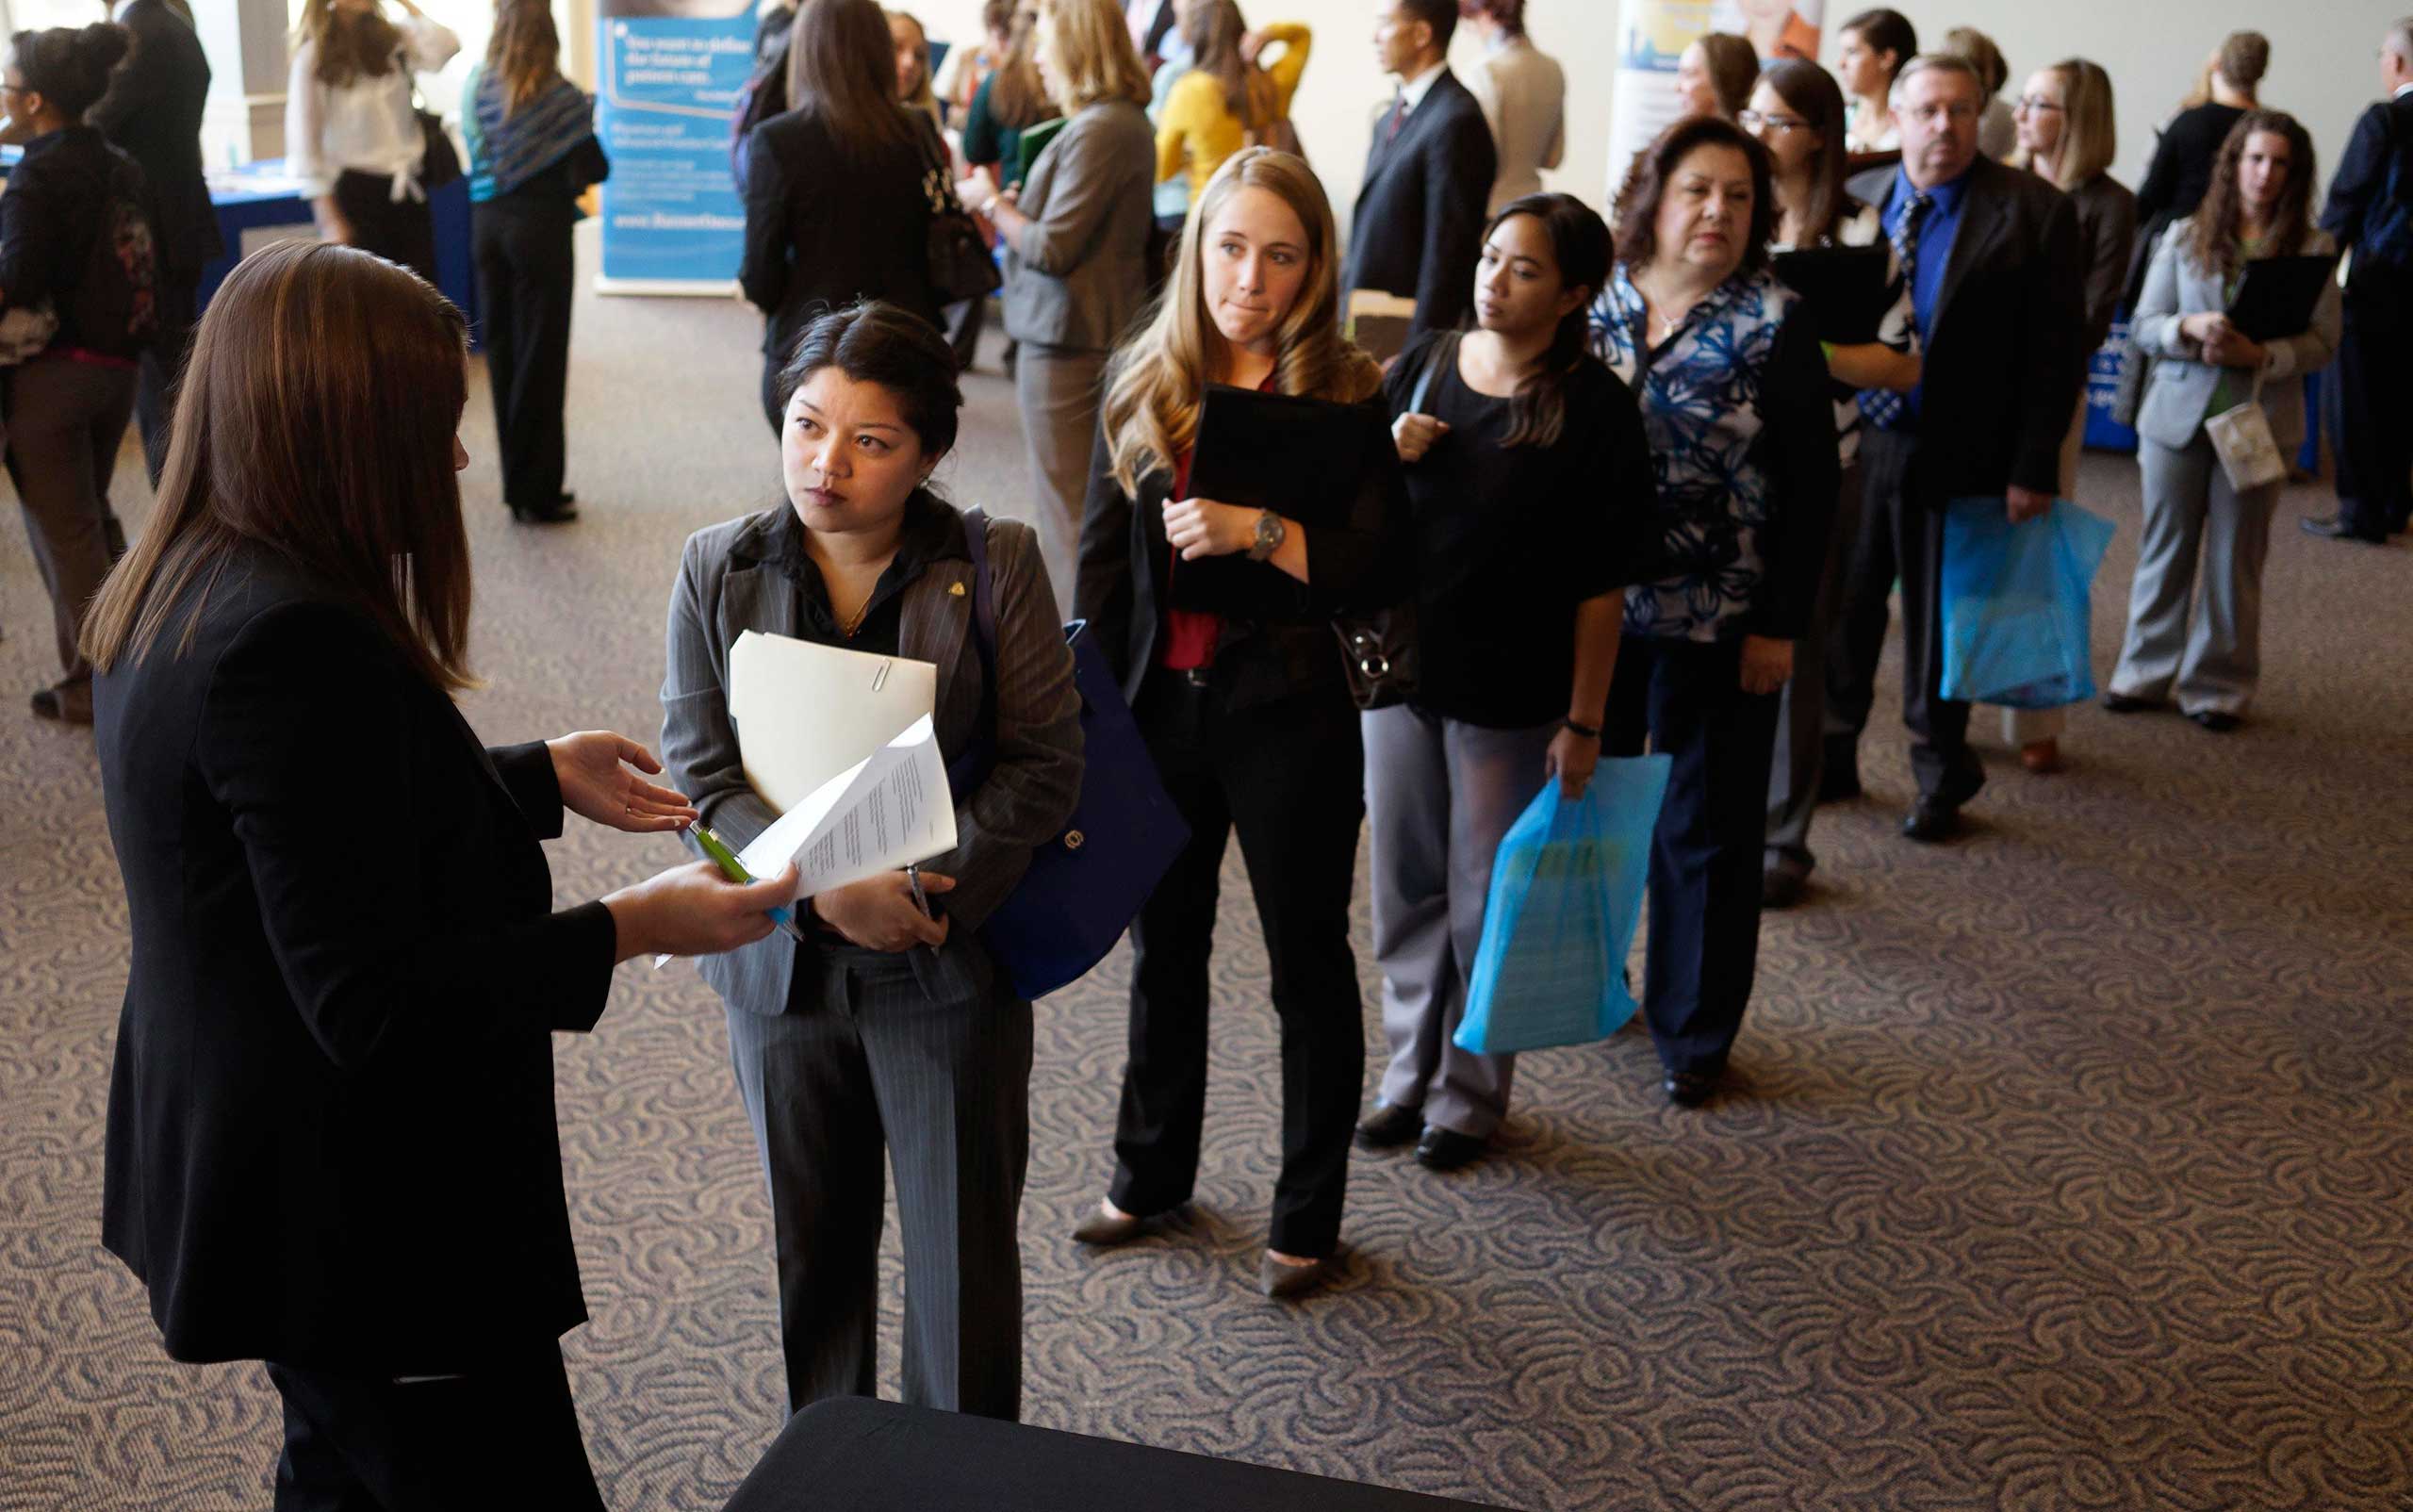 Jobseekers wait to talk to a recruiter at the Colorado Hospital Association's health care career event in Denver, Oct. 13, 2014. (Rick Wilking—Reuters)